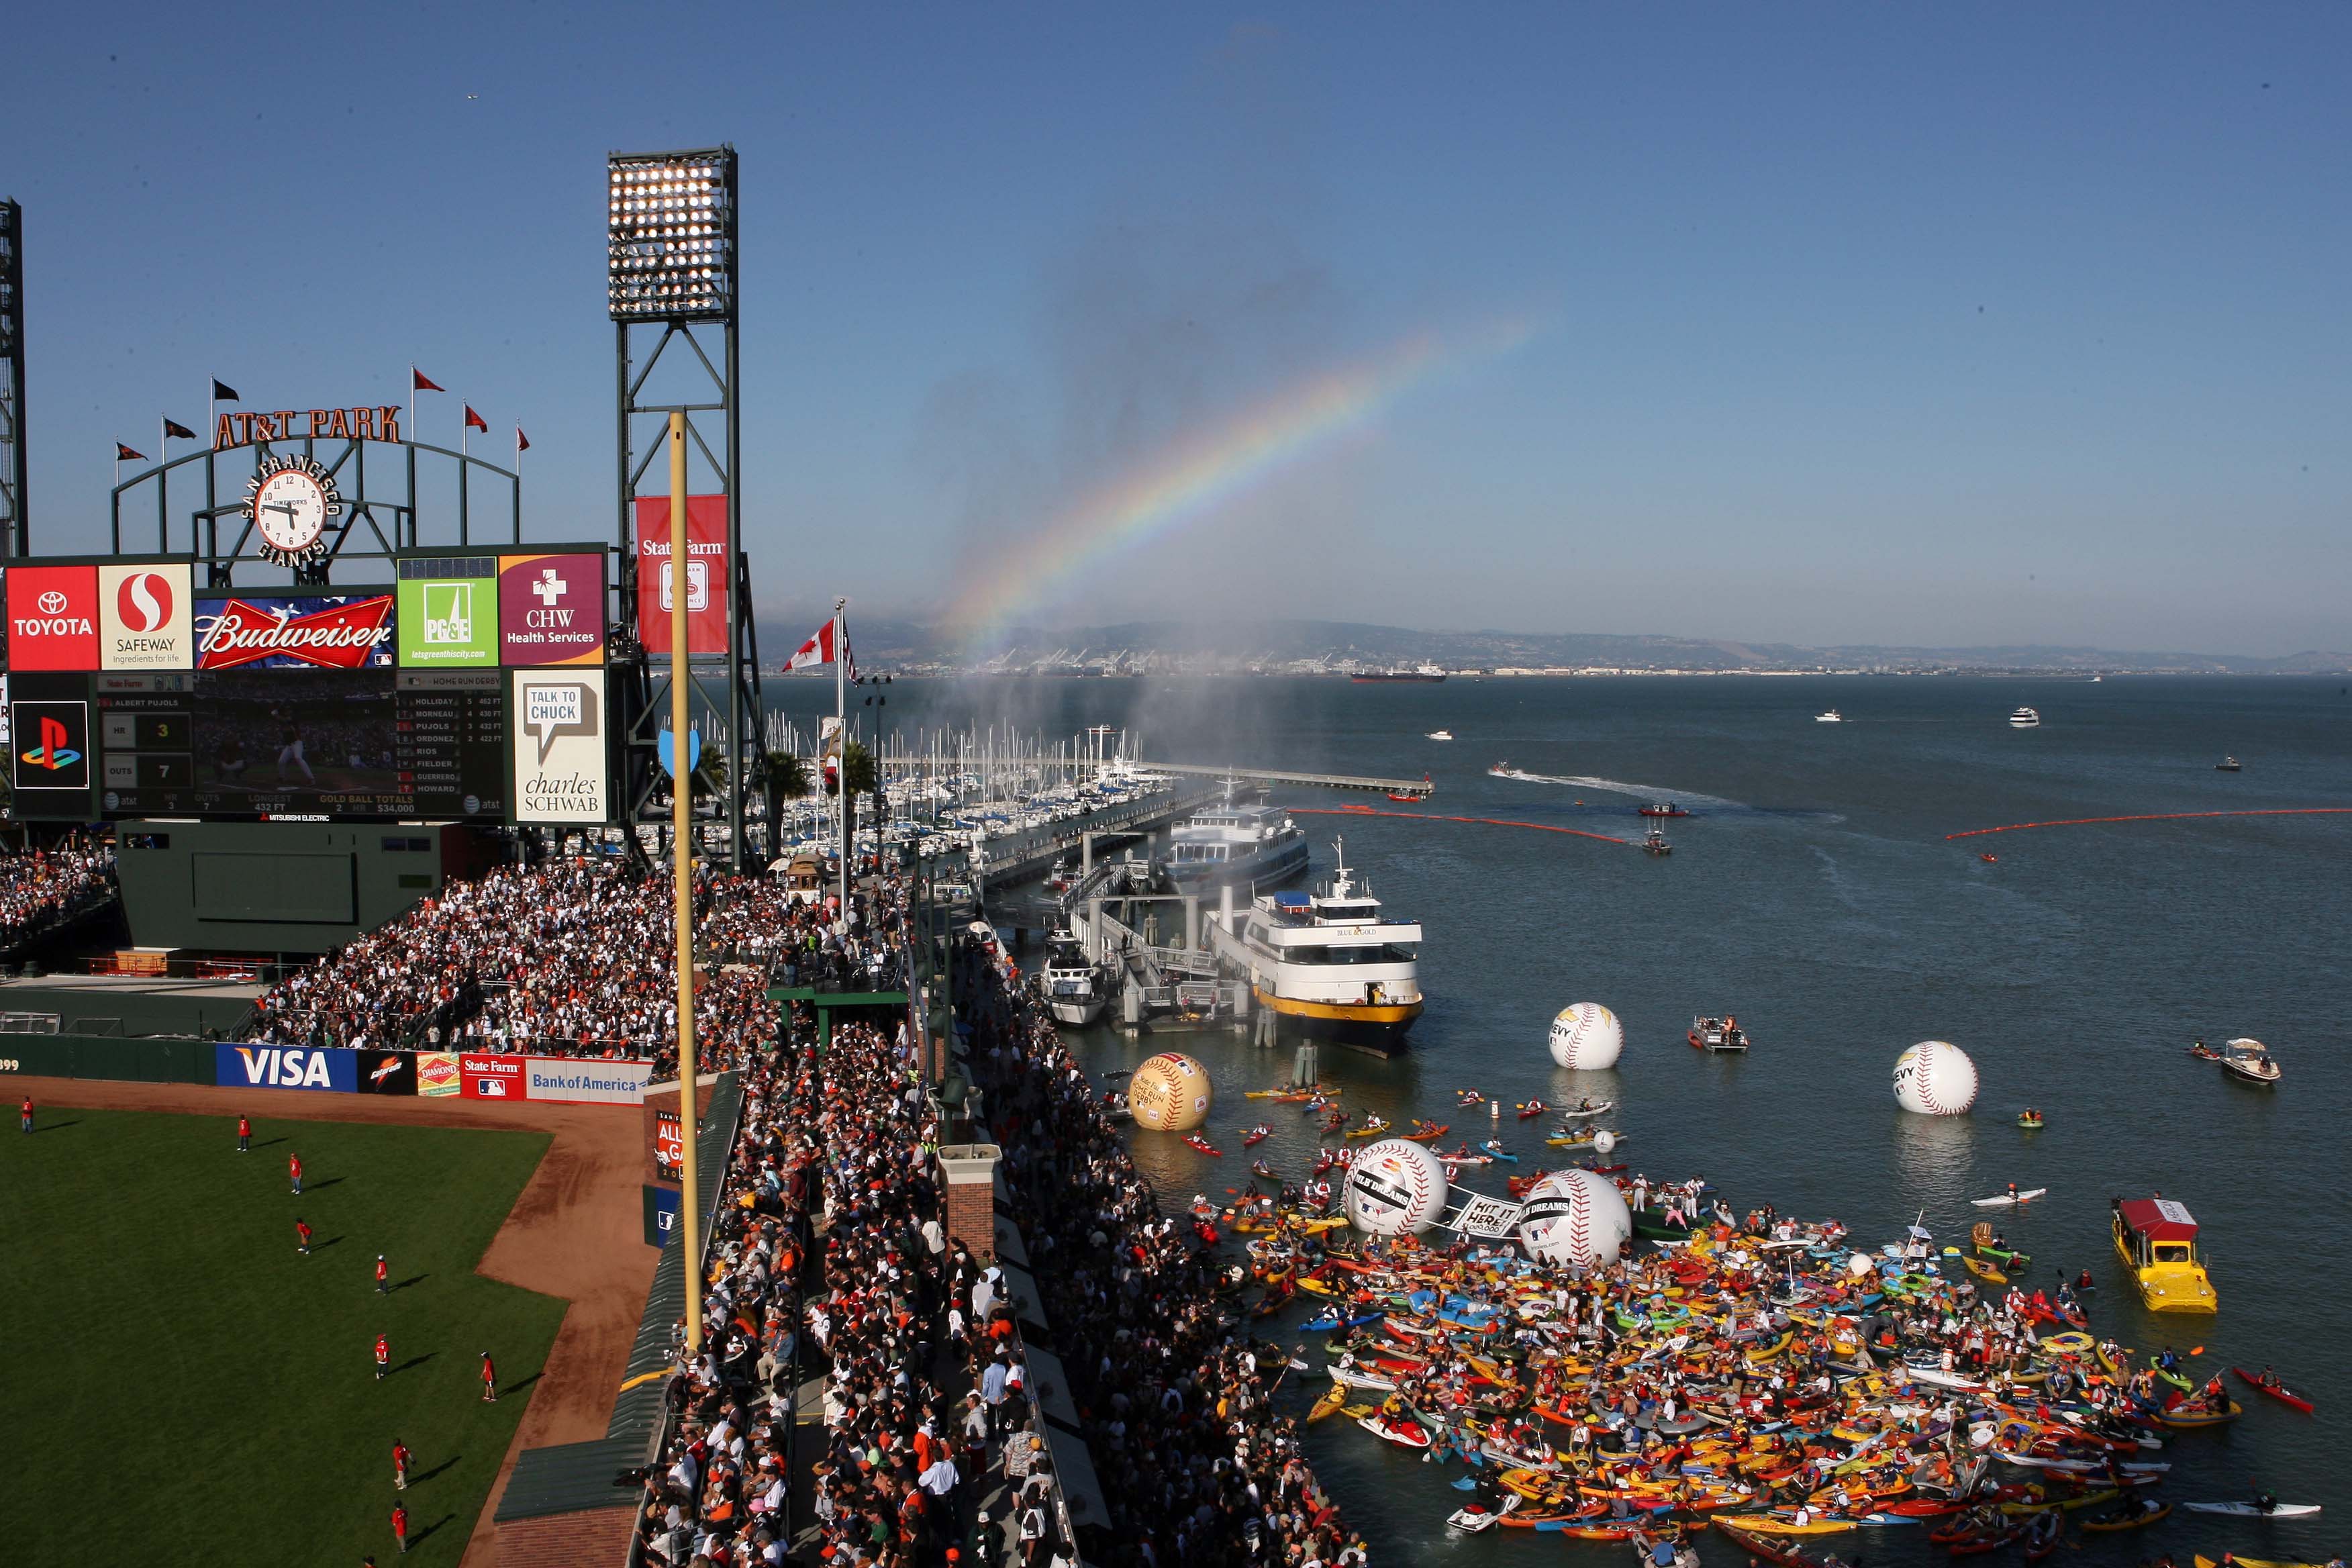 All Star Series at San Francisco Giants. Shot for The Port of San Francisco 